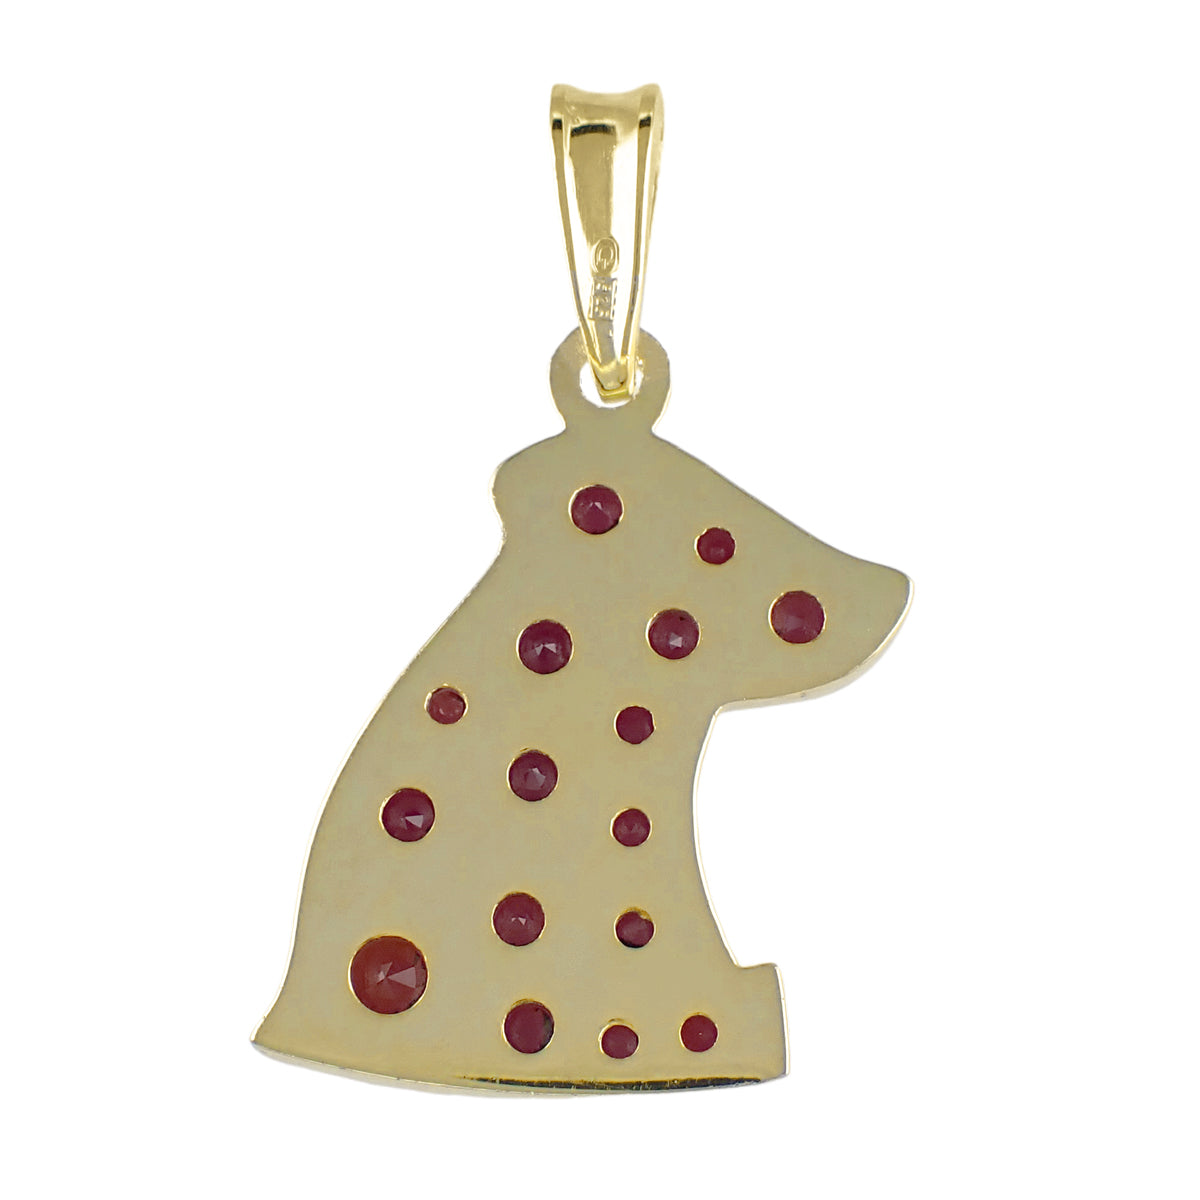 Bohemian Red Garnet Dog Pendant in Sterling Silver and Yellow Gold Vermeil - Item:  - Image: 2